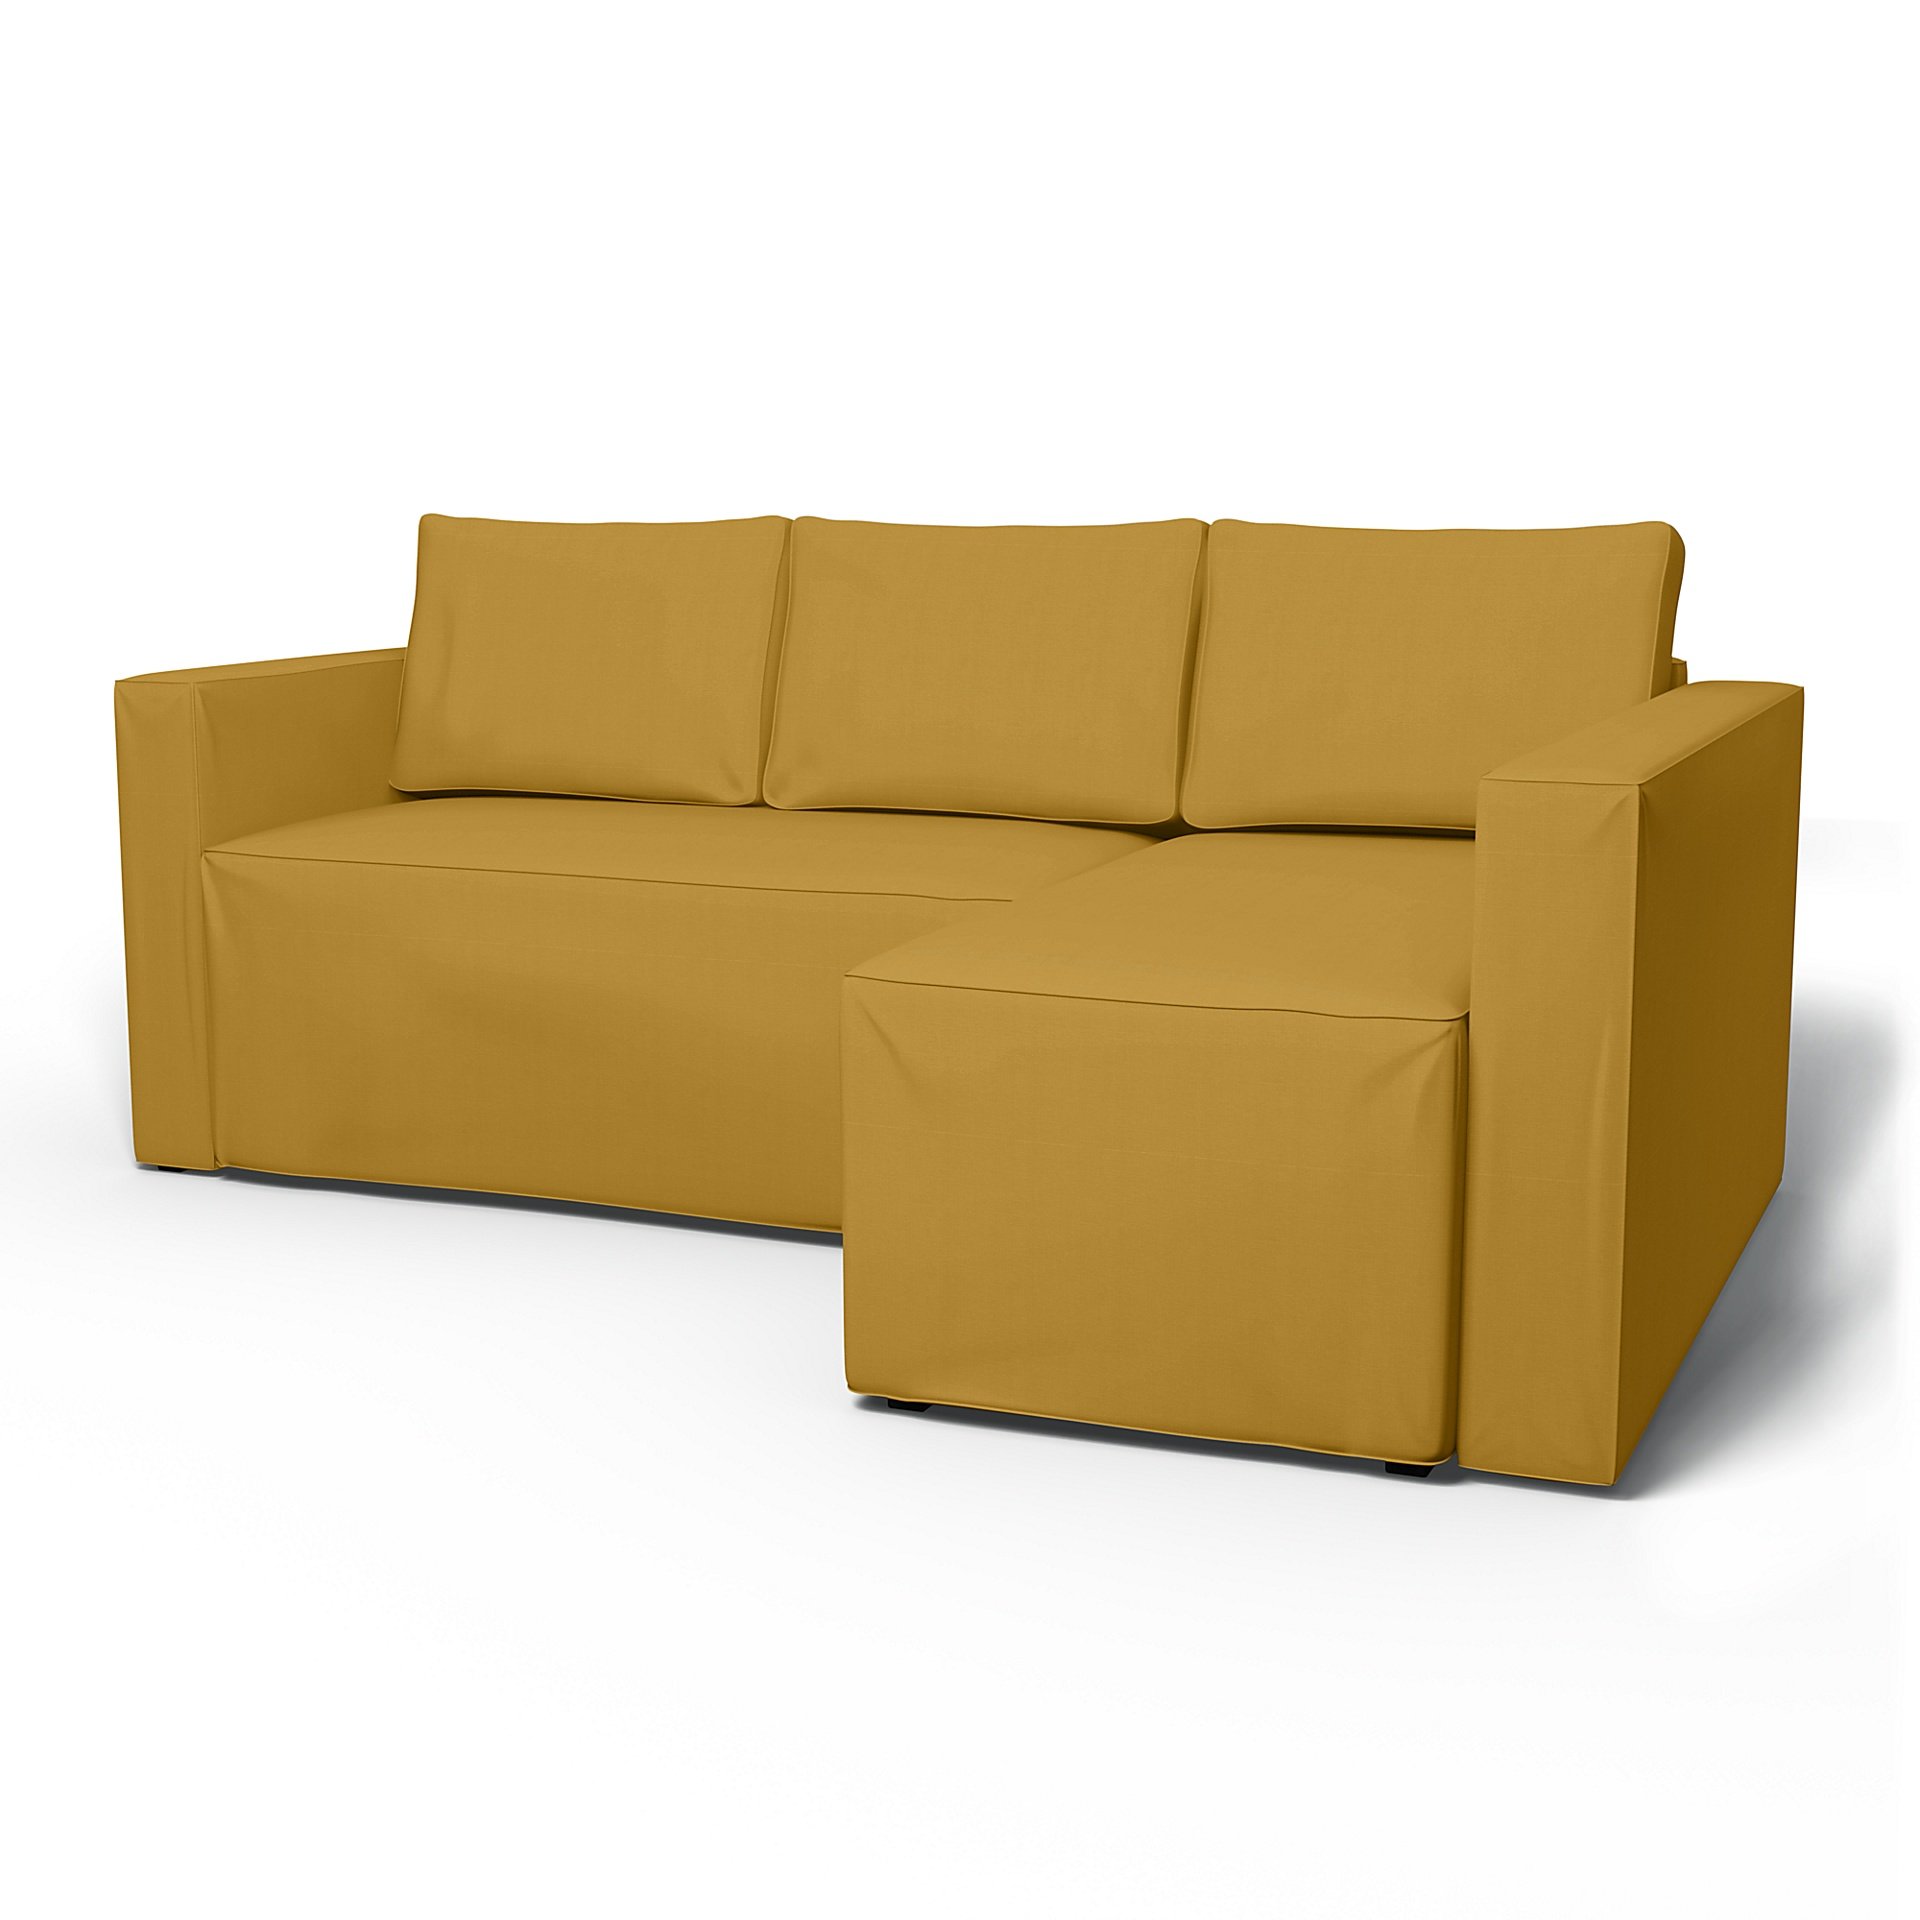 IKEA - Manstad Sofa Bed with Right Chaise Cover, Honey Mustard, Cotton - Bemz